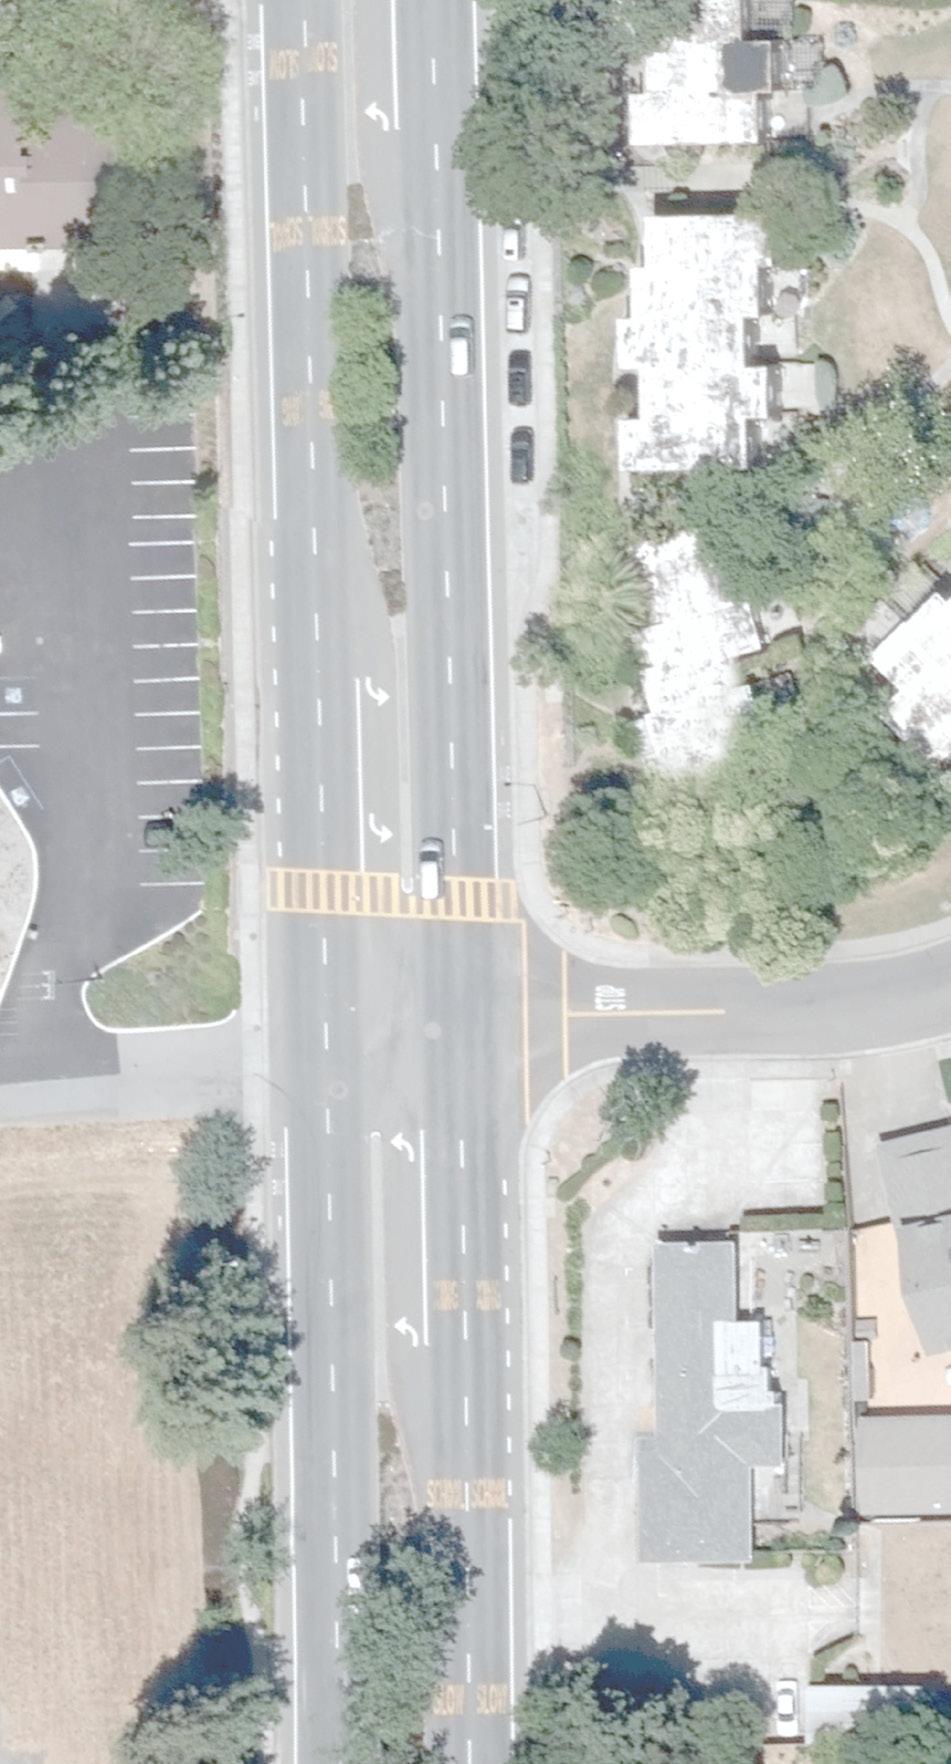 Multilane (four or more lanes with raised median) Multilane (four or more lanes without raised median) B E E E E S E E S S S S B E S E E S S S S S S S Retrofit (E) Curb Ramp w/ Truncated Domes